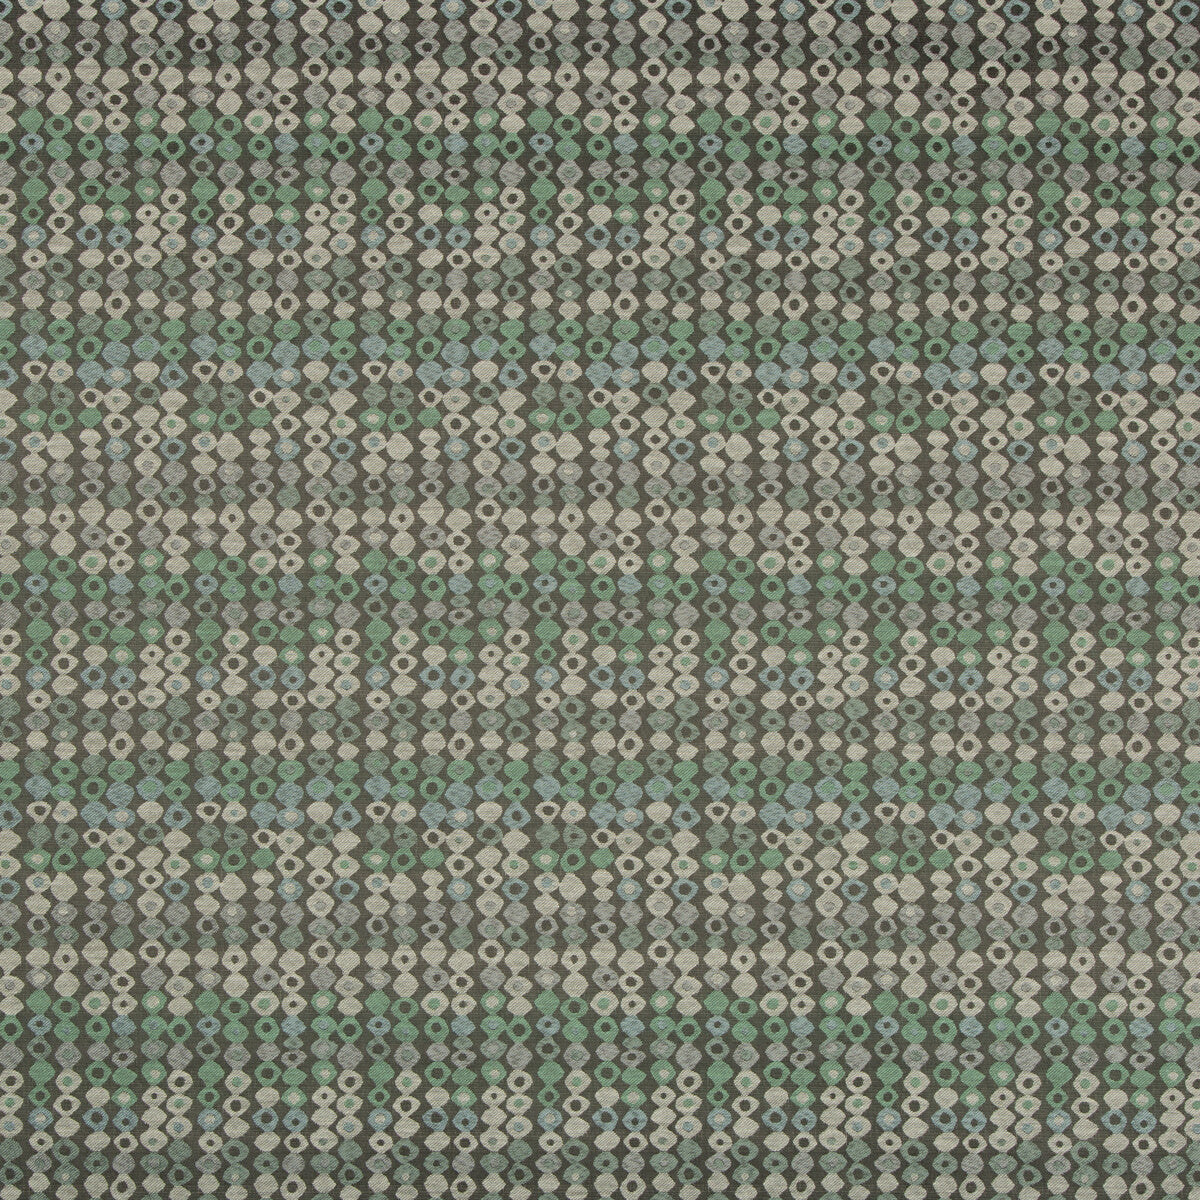 Missing Link fabric in sea green color - pattern 32927.35.0 - by Kravet Contract in the Gis Crypton collection